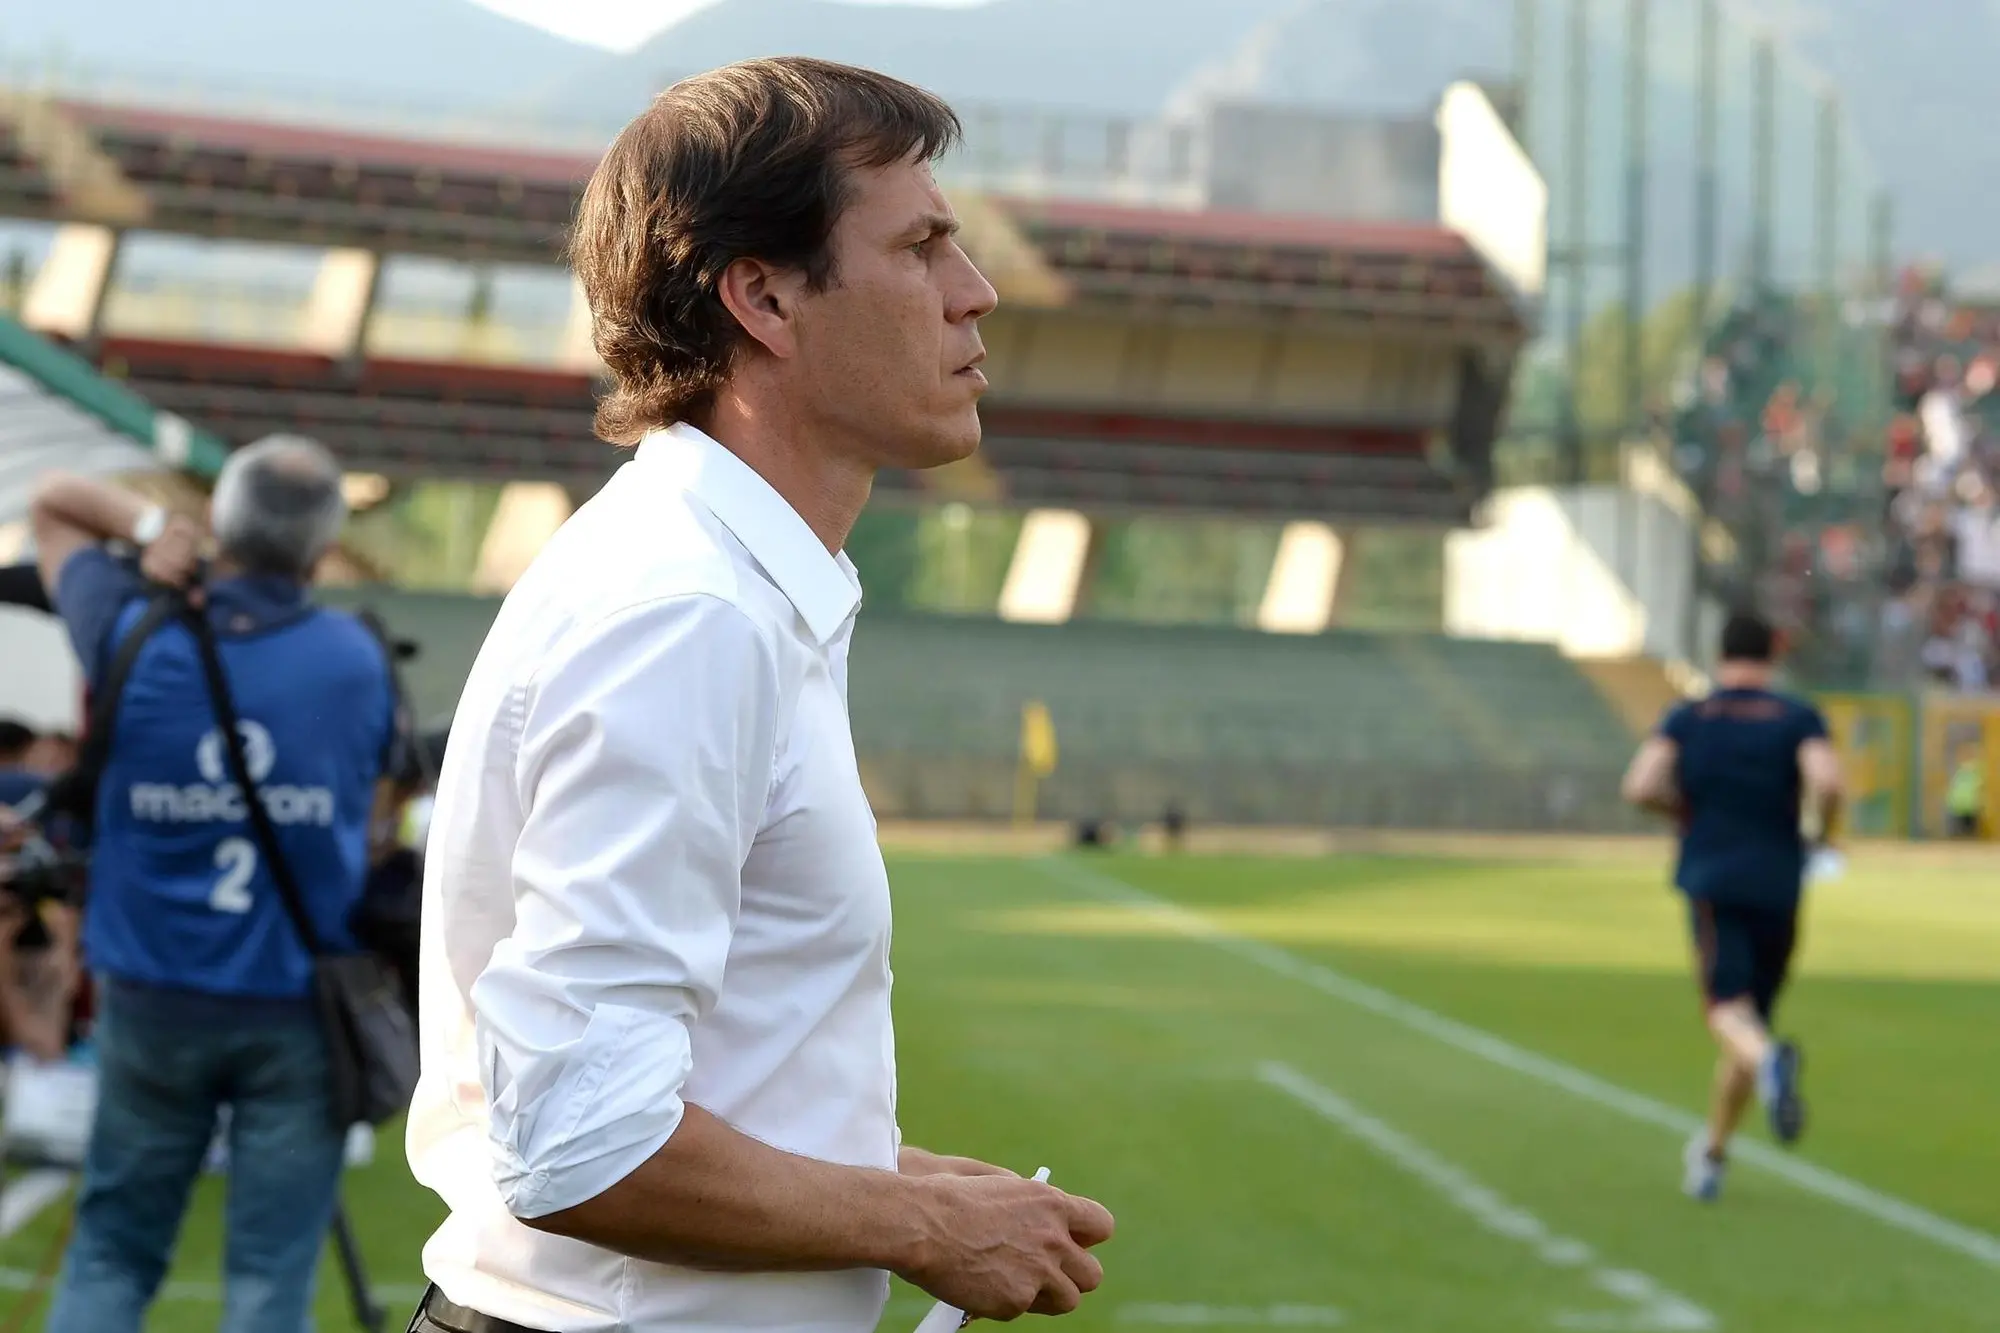 French coach of AS Roma, Rudi Garcia, during the friendly soccer match Ternana vs AS Roma at Liberati stadium in Terni, Italy, 17 August 2013. ANSA/LUCIANO ROSSI/AS ROMA